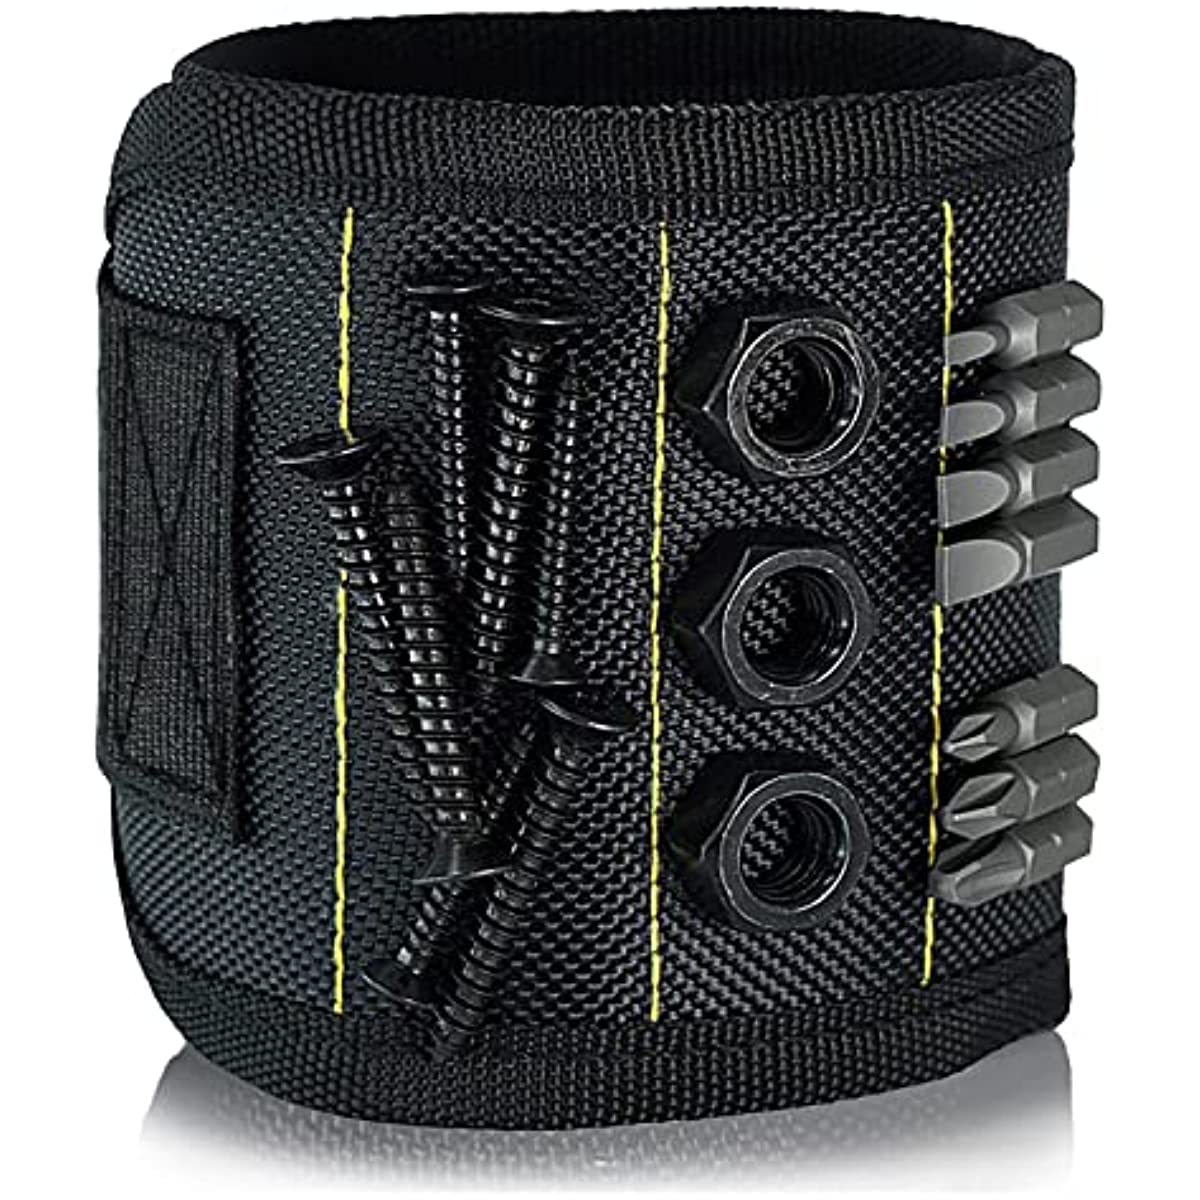 Magnetic Wristband Black With Super Strong Magnets Holds Screws, Drill Bit.  Unique Wrist Support Design Handy Gadget Electrician - AliExpress